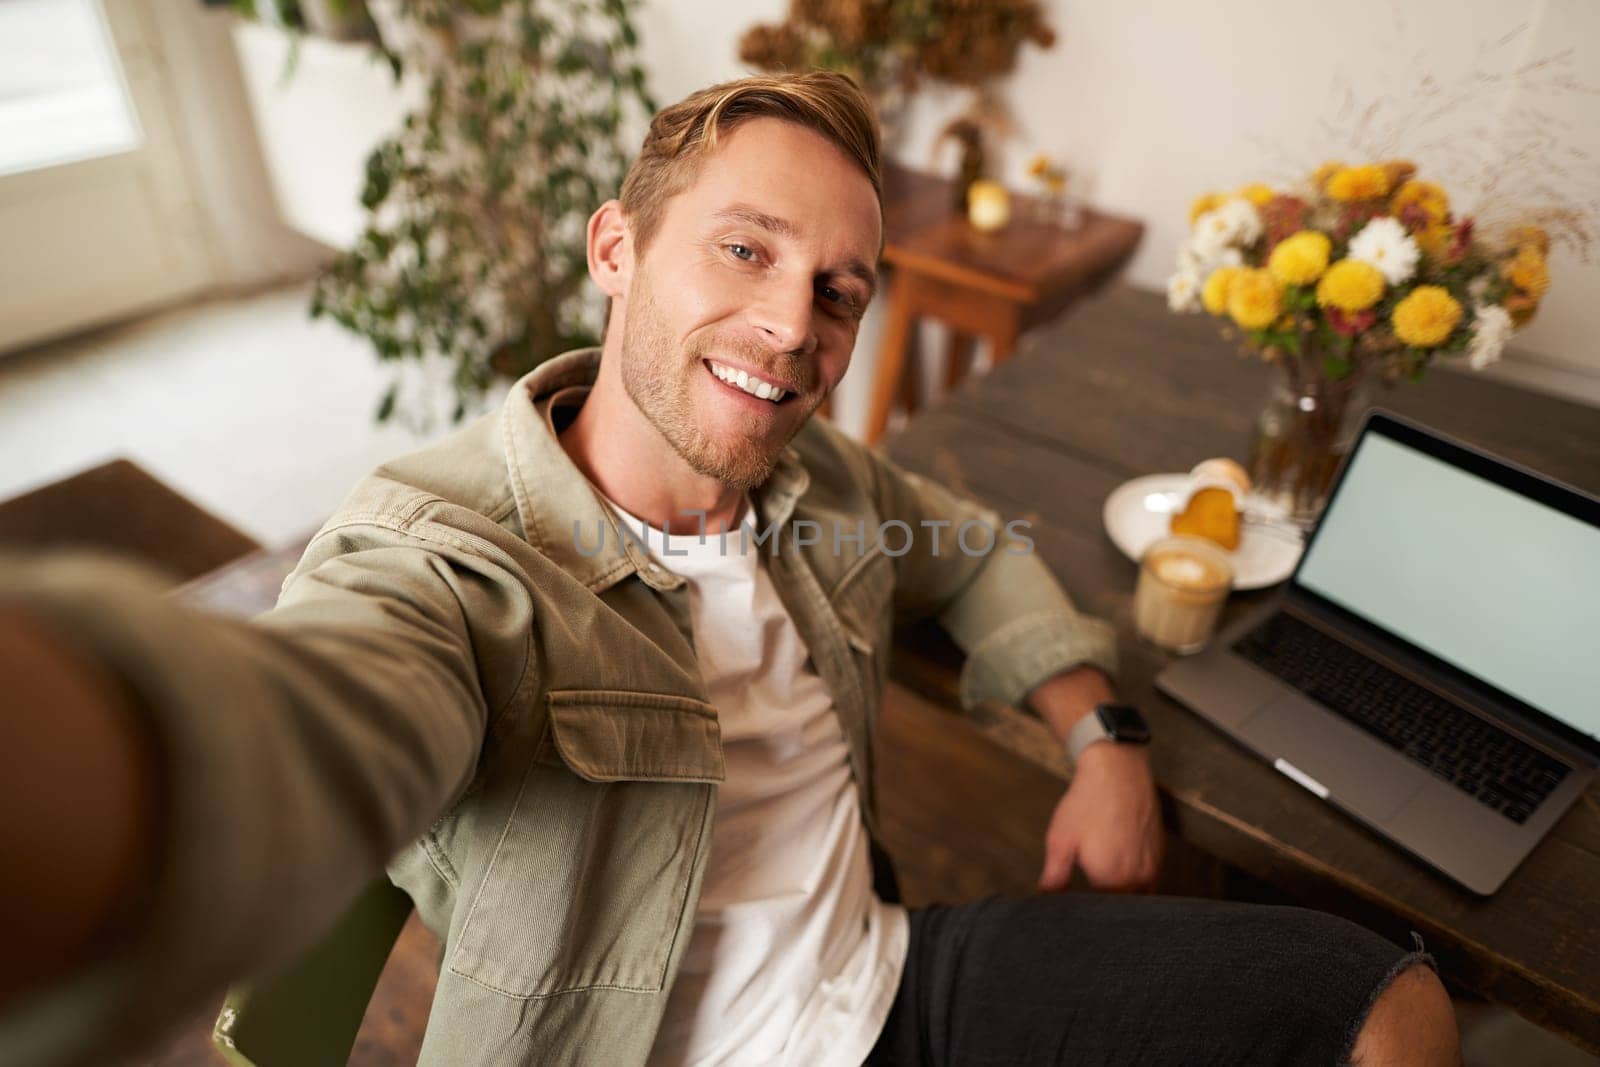 Selfie portrait of handsome young man, taking picture of himself in cafe with laptop, smiling at camera.